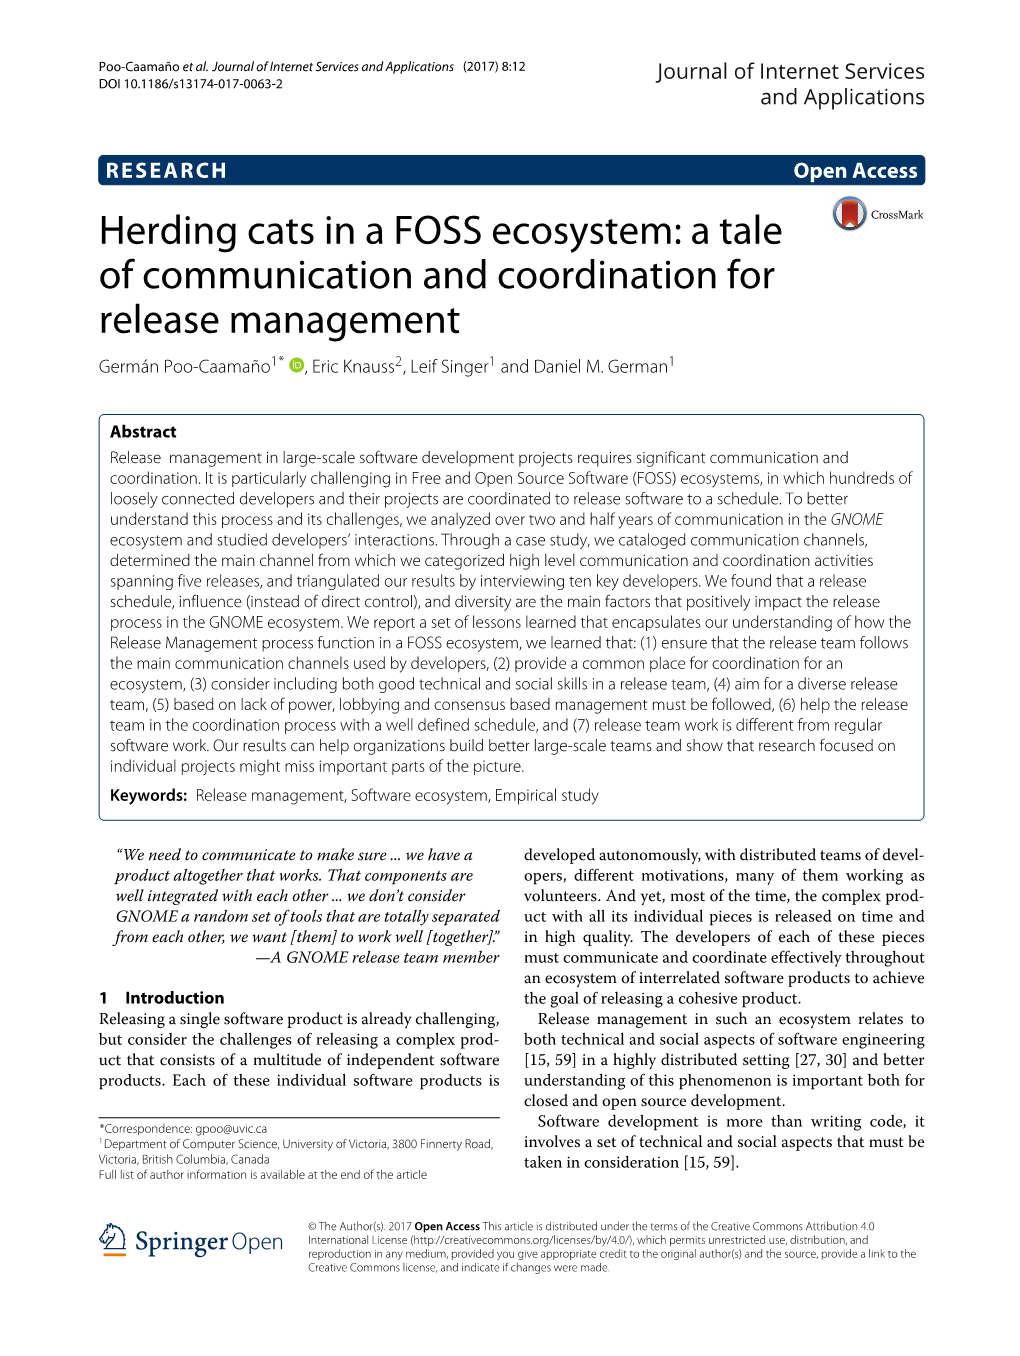 Herding Cats in a FOSS Ecosystem: a Tale of Communication and Coordination for Release Management Germán Poo-Caamaño1* , Eric Knauss2,Leifsinger1 and Daniel M